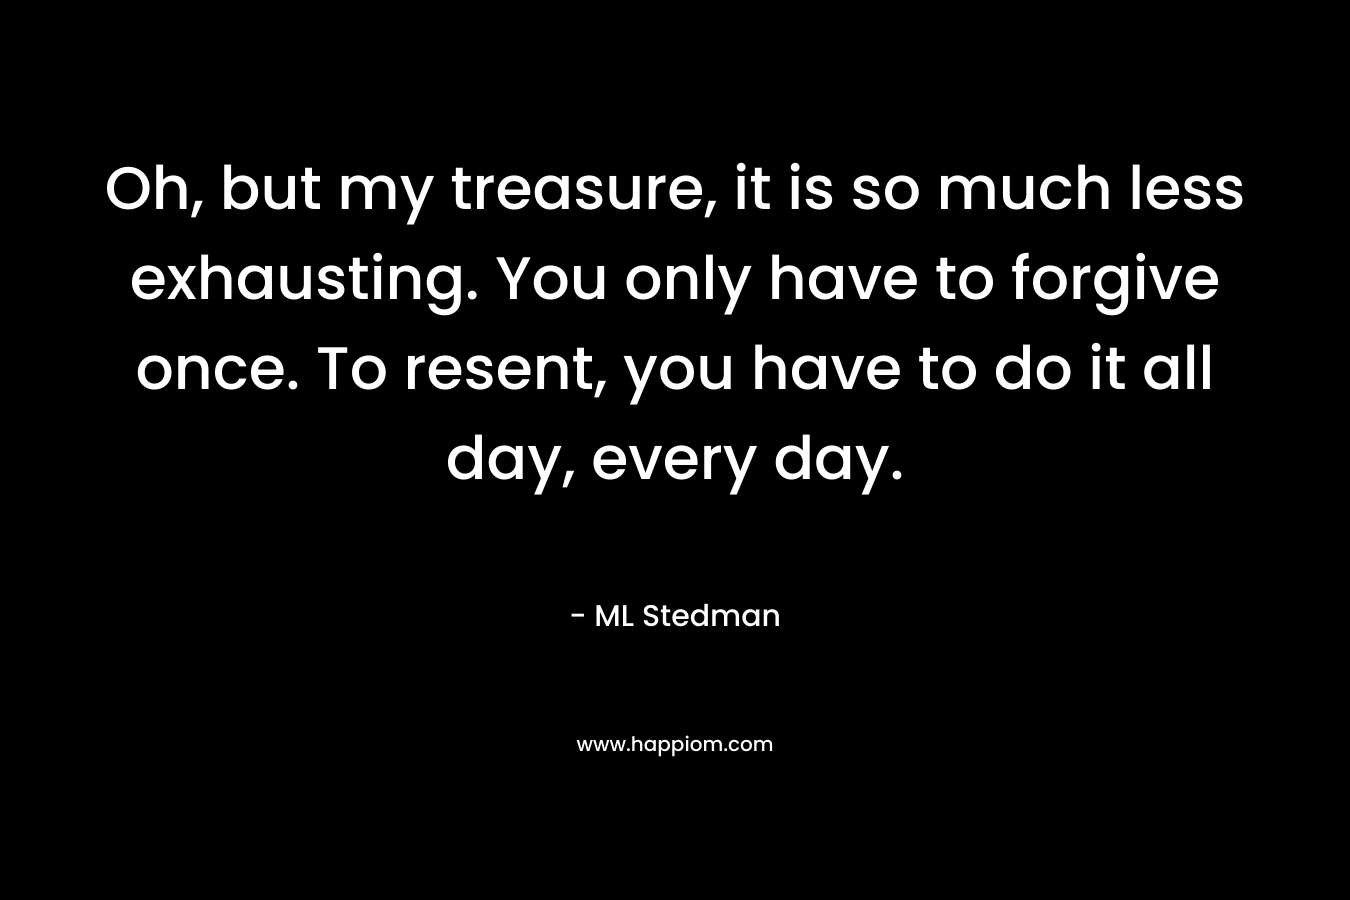 Oh, but my treasure, it is so much less exhausting. You only have to forgive once. To resent, you have to do it all day, every day.